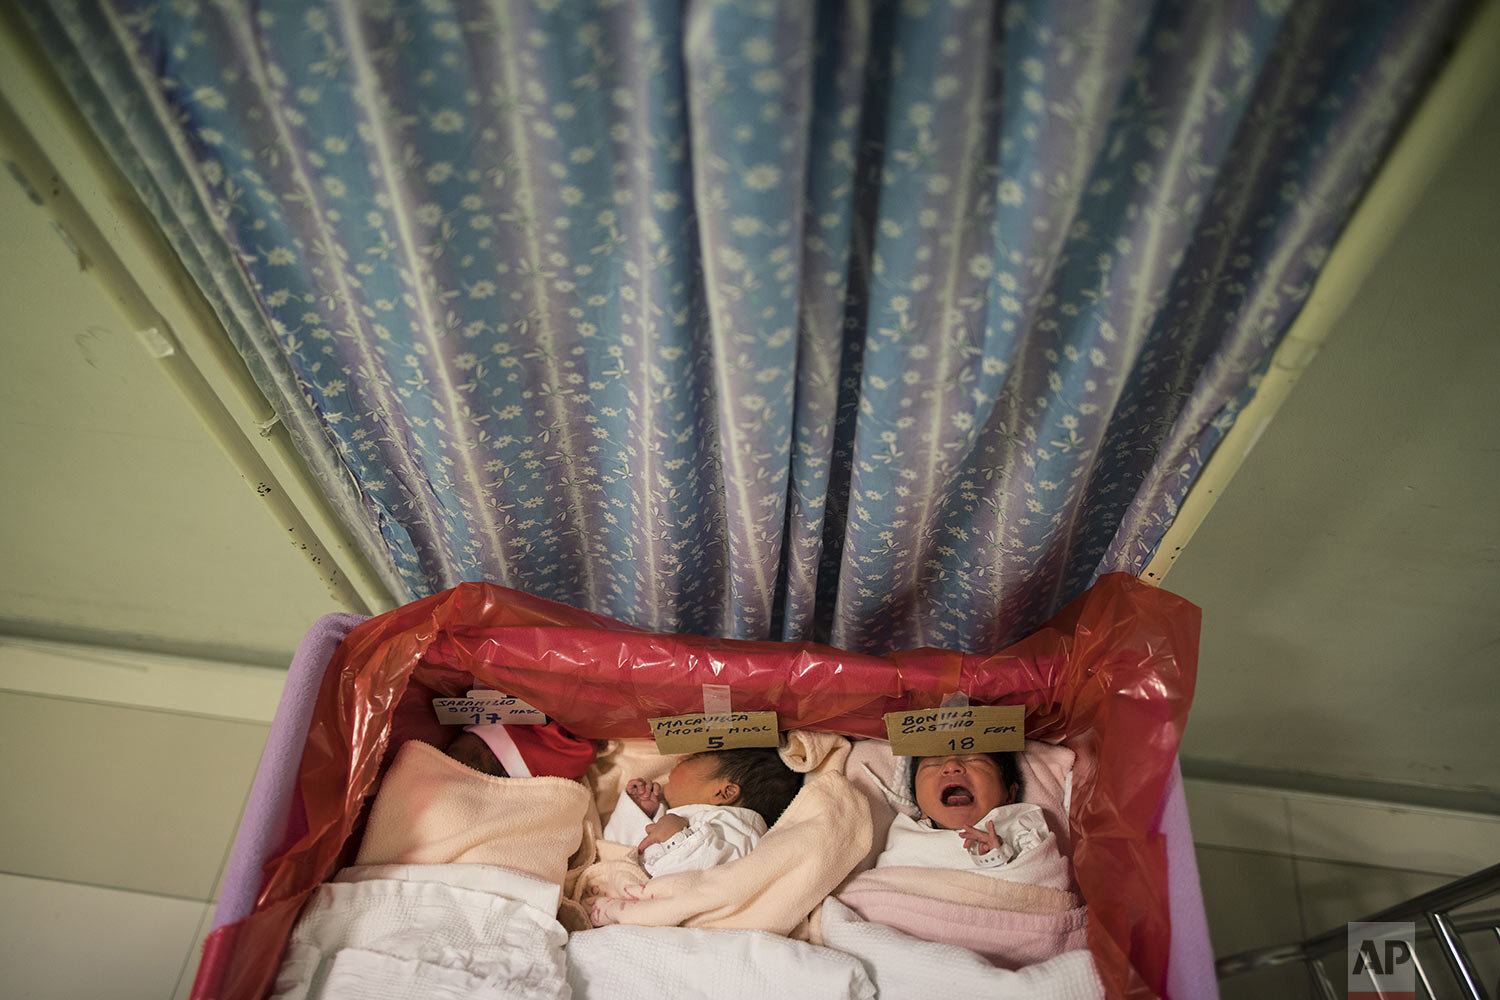  A newborn baby cries lying in a crib lined with a red plastic sheet to identify babies whose mothers are infected with the new coronavirus, at the National Perinatal and Maternal Institute in Lima, Peru, Thursday, July 30, 2020.  (AP Photo/Rodrigo A